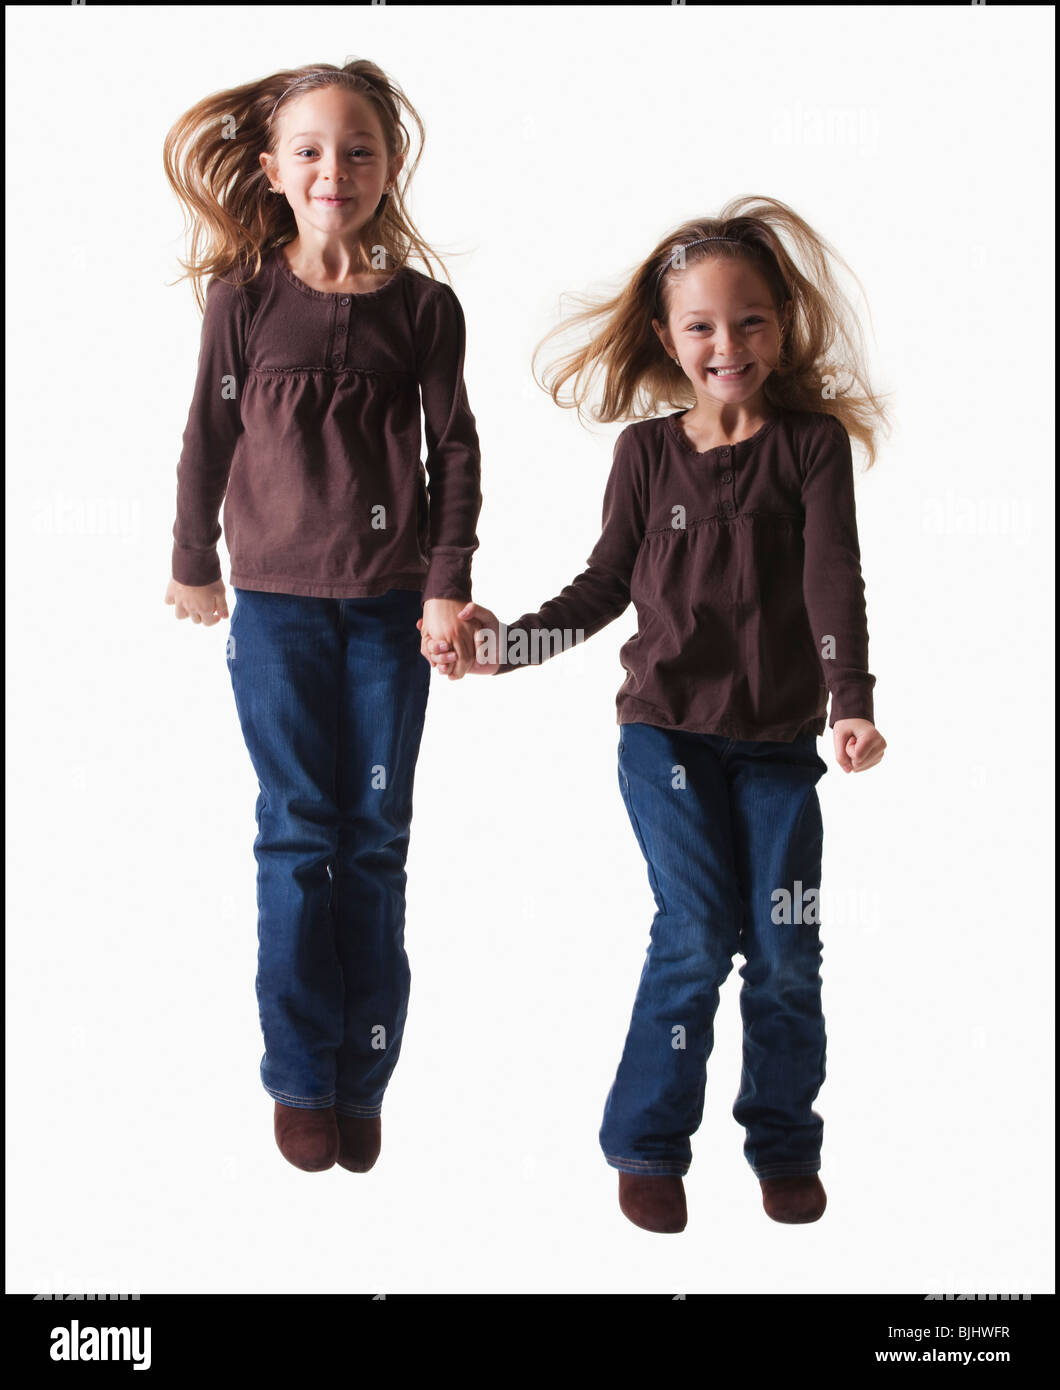 Identical twins jumping Stock Photo